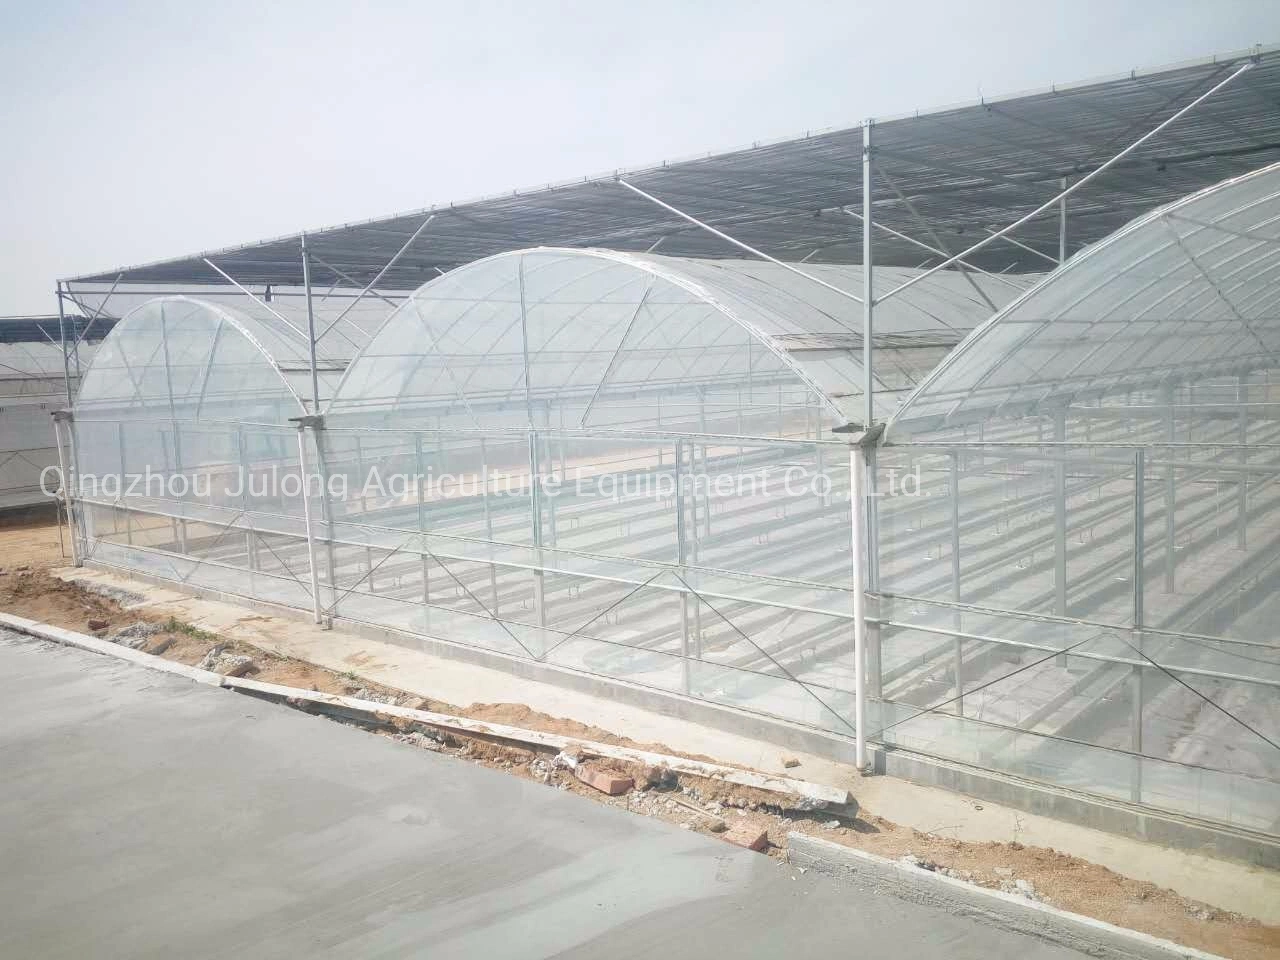 Multi-Span Plastic Film Tunnel Greenhouse Vegetables Hydroponics Growing System for Sale